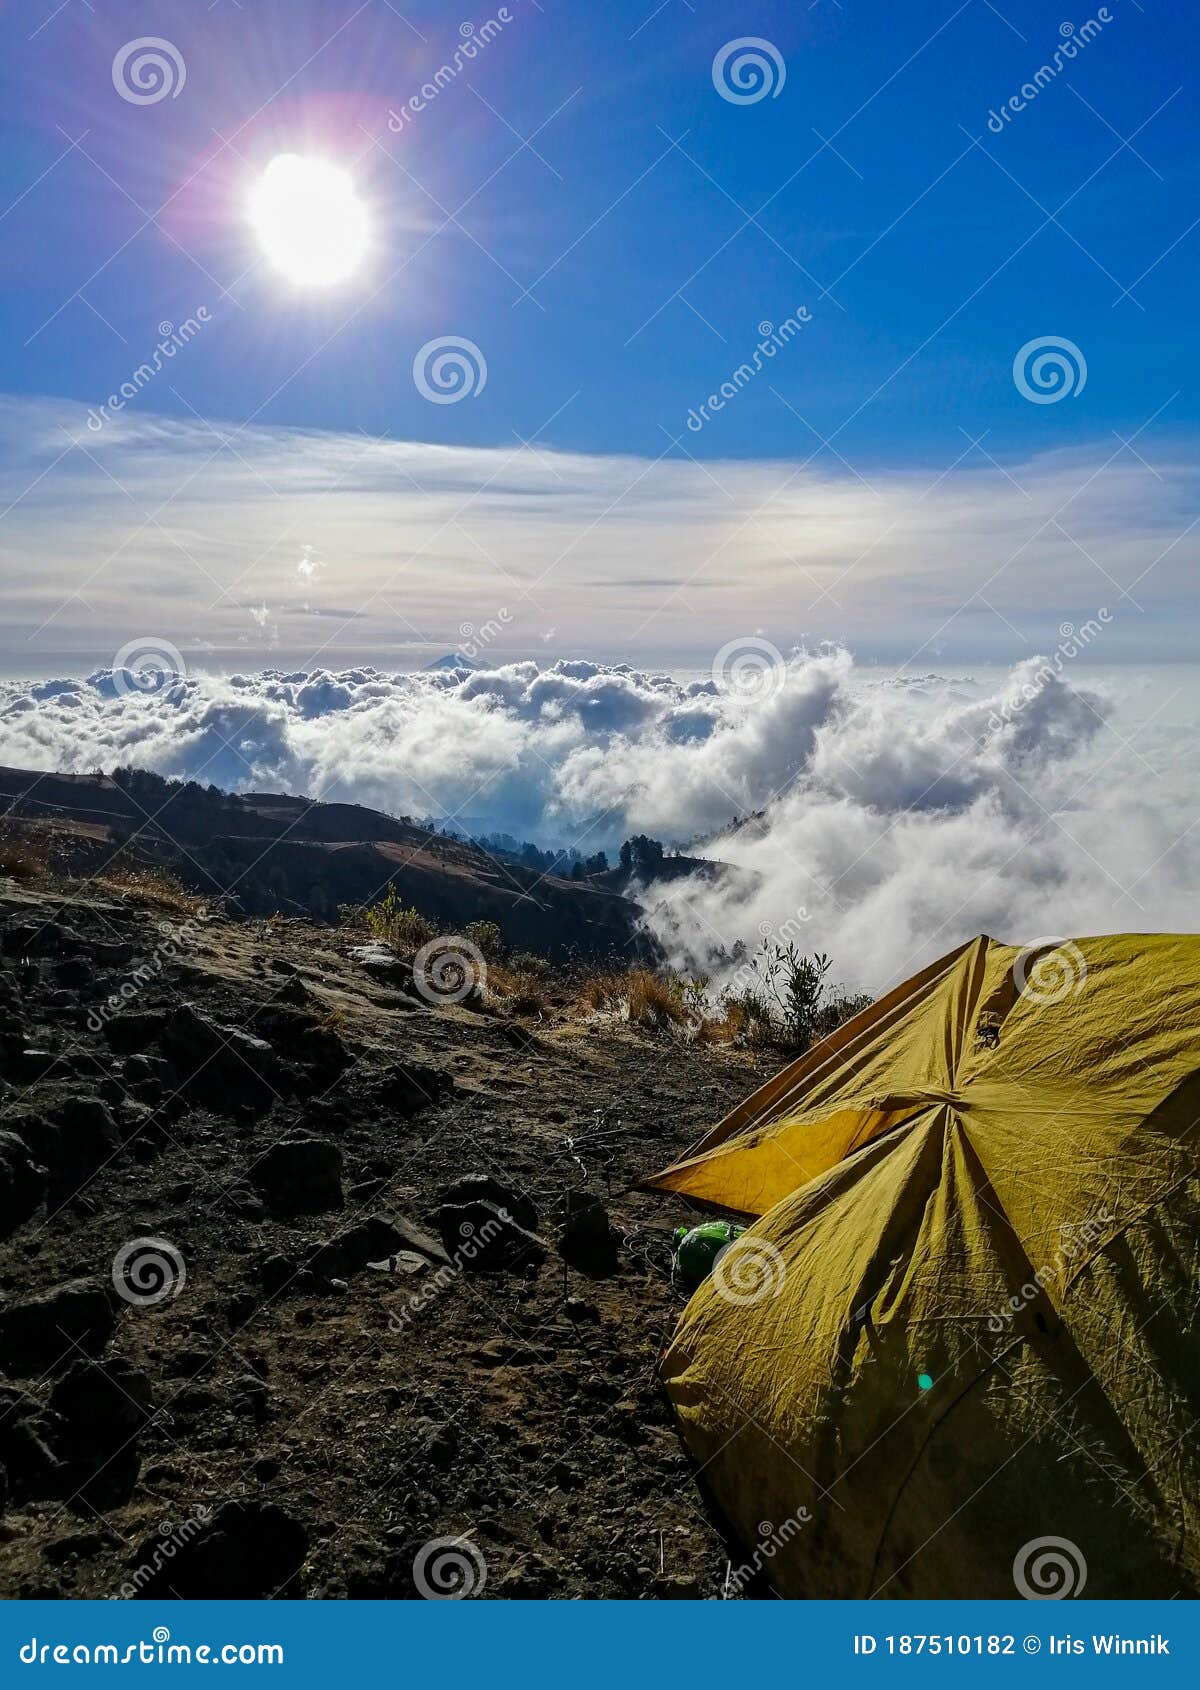 sleeping on a volcano, waking up above the clouds.